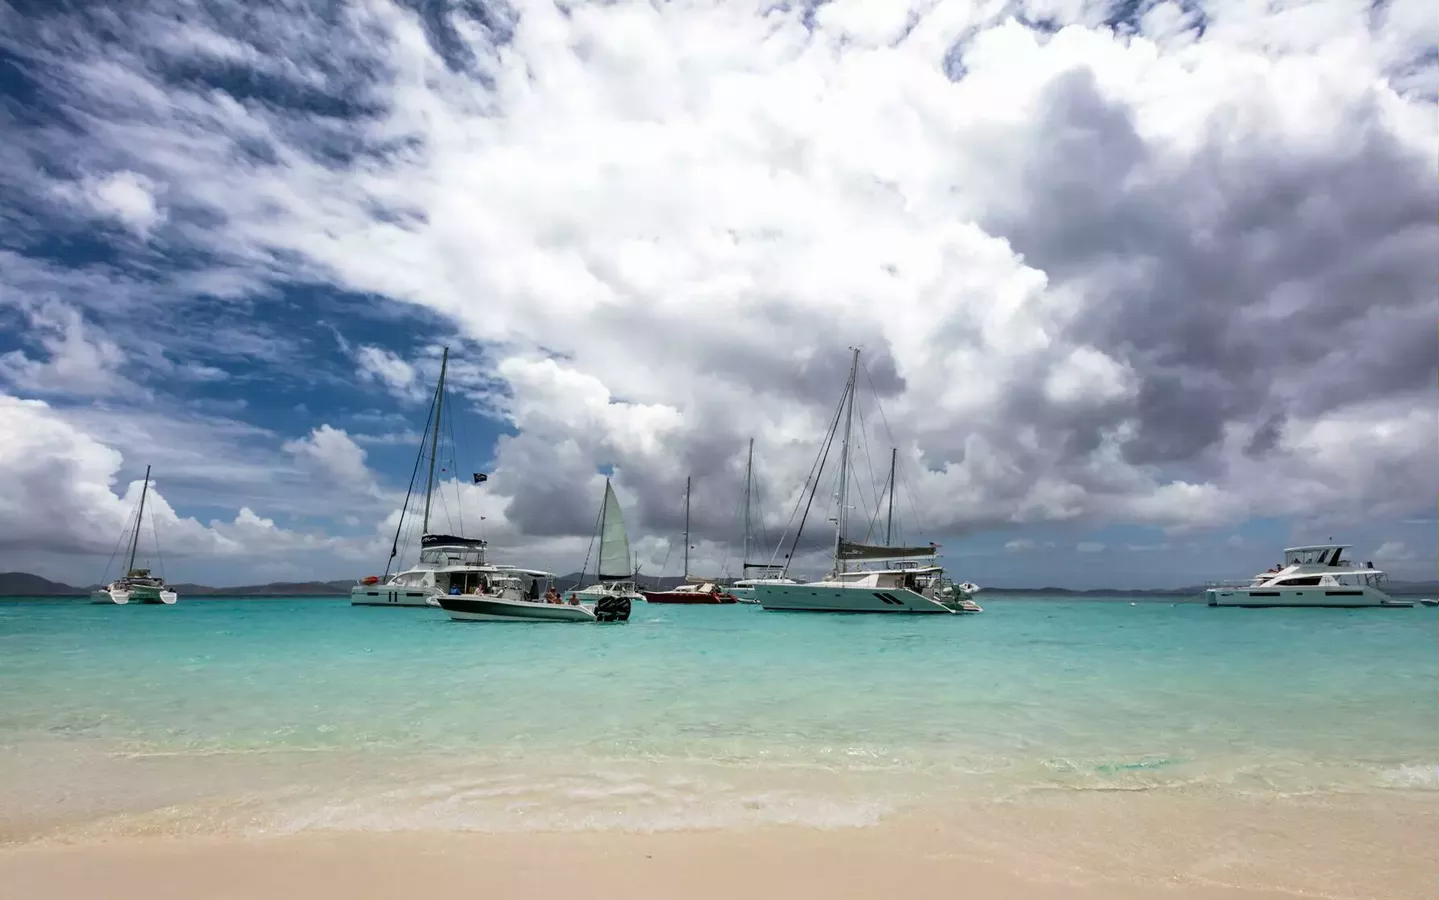 Yachts docked ashore the beach - Charter in the USVI BVI or both?